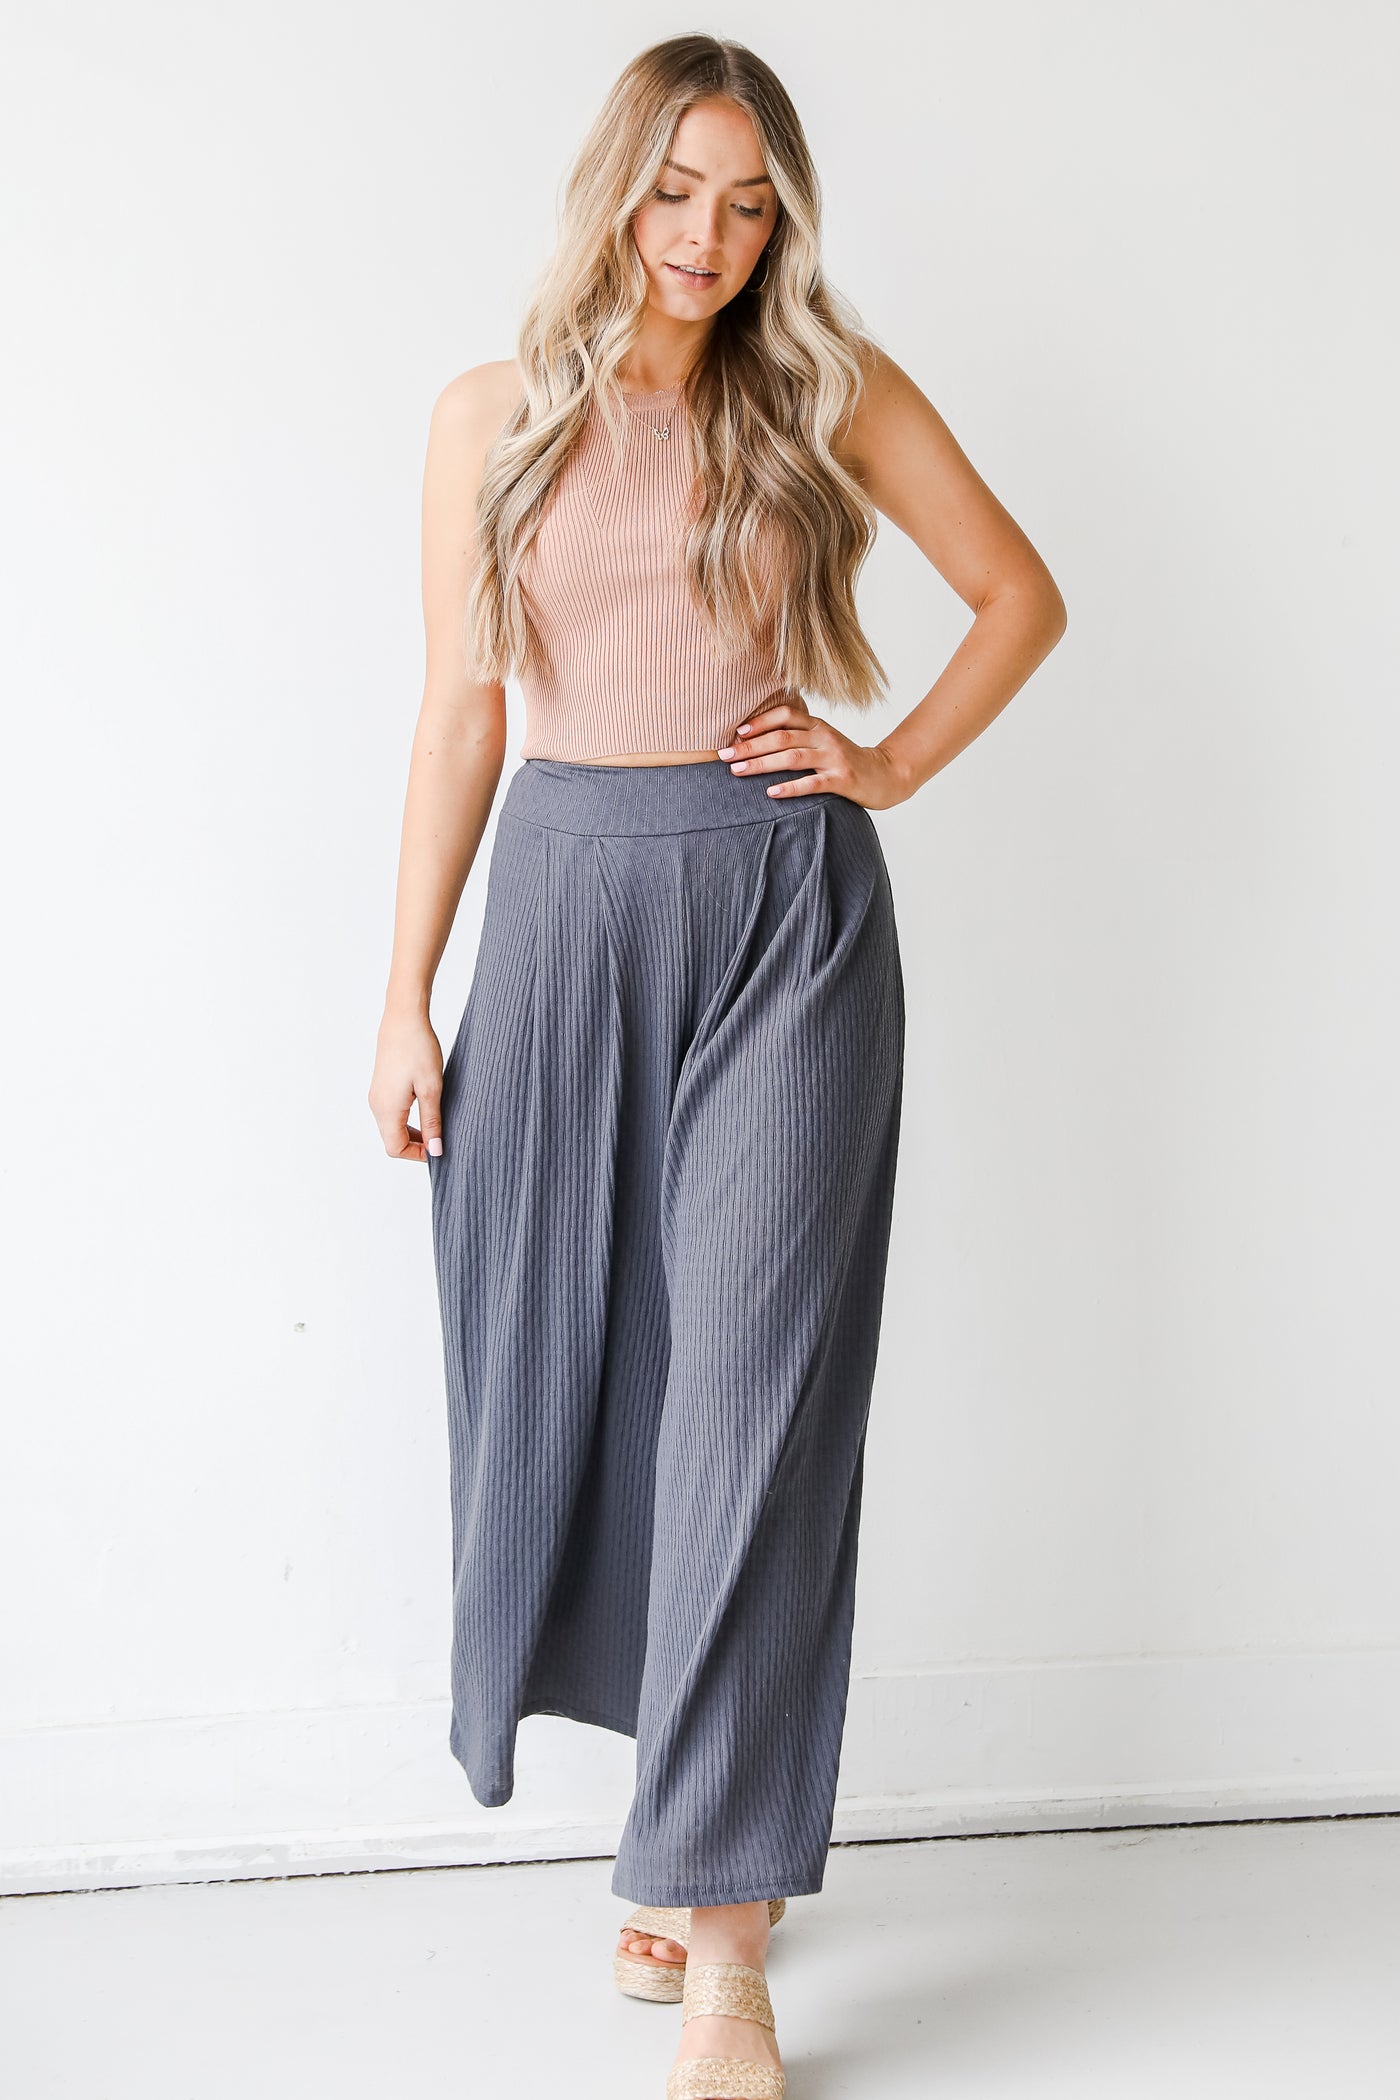 Knit Wide Leg Pants from dress up